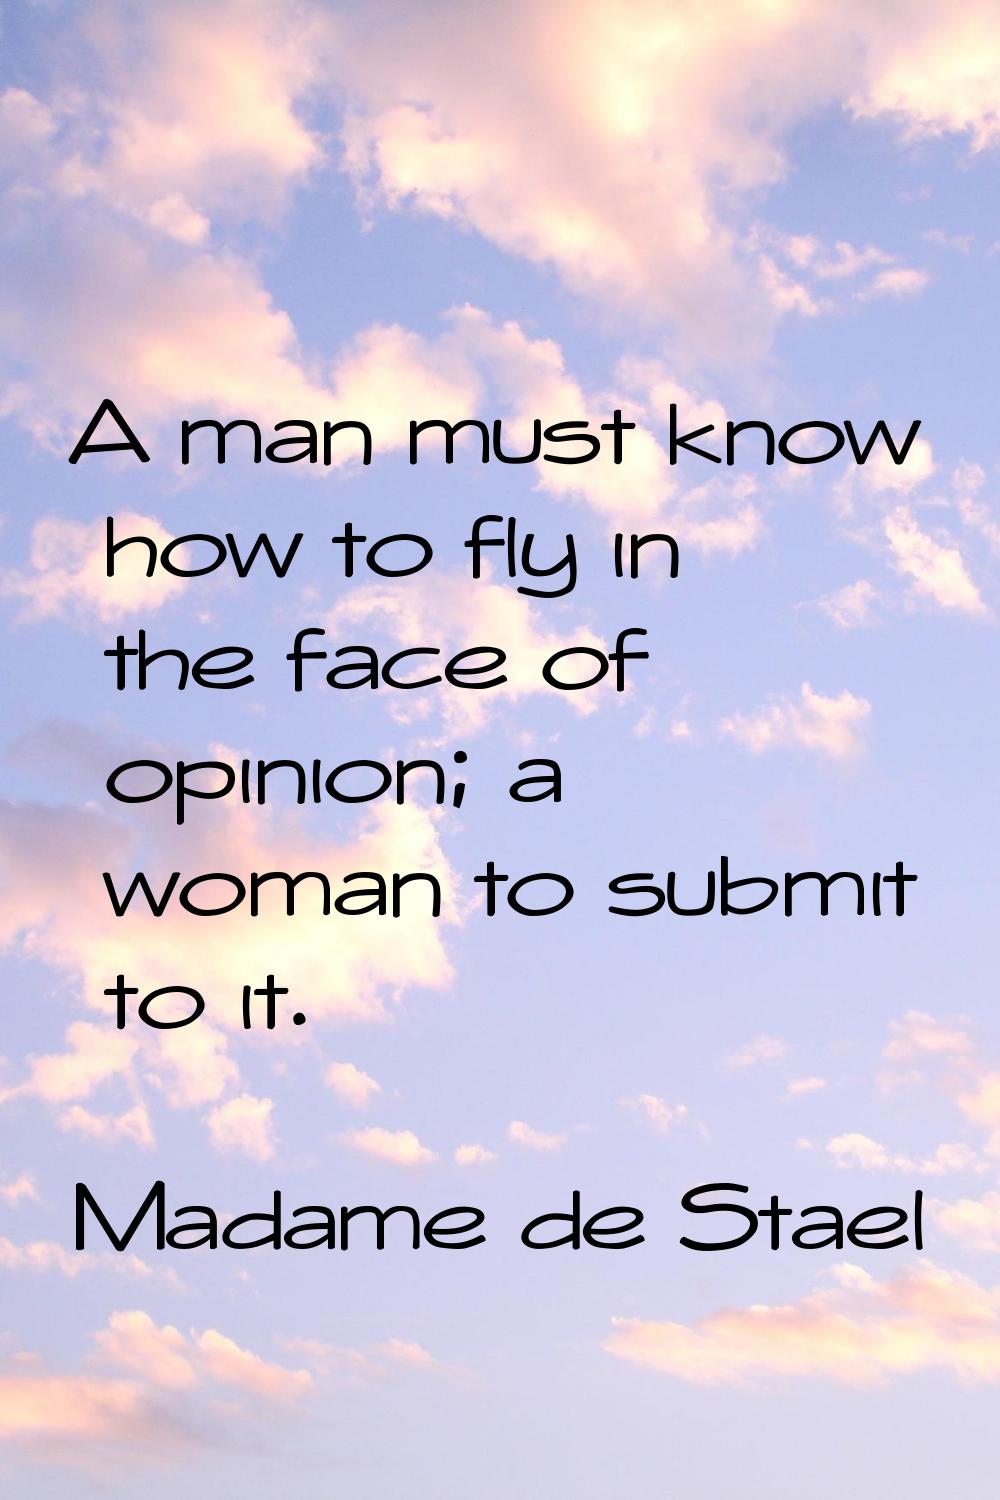 A man must know how to fly in the face of opinion; a woman to submit to it.